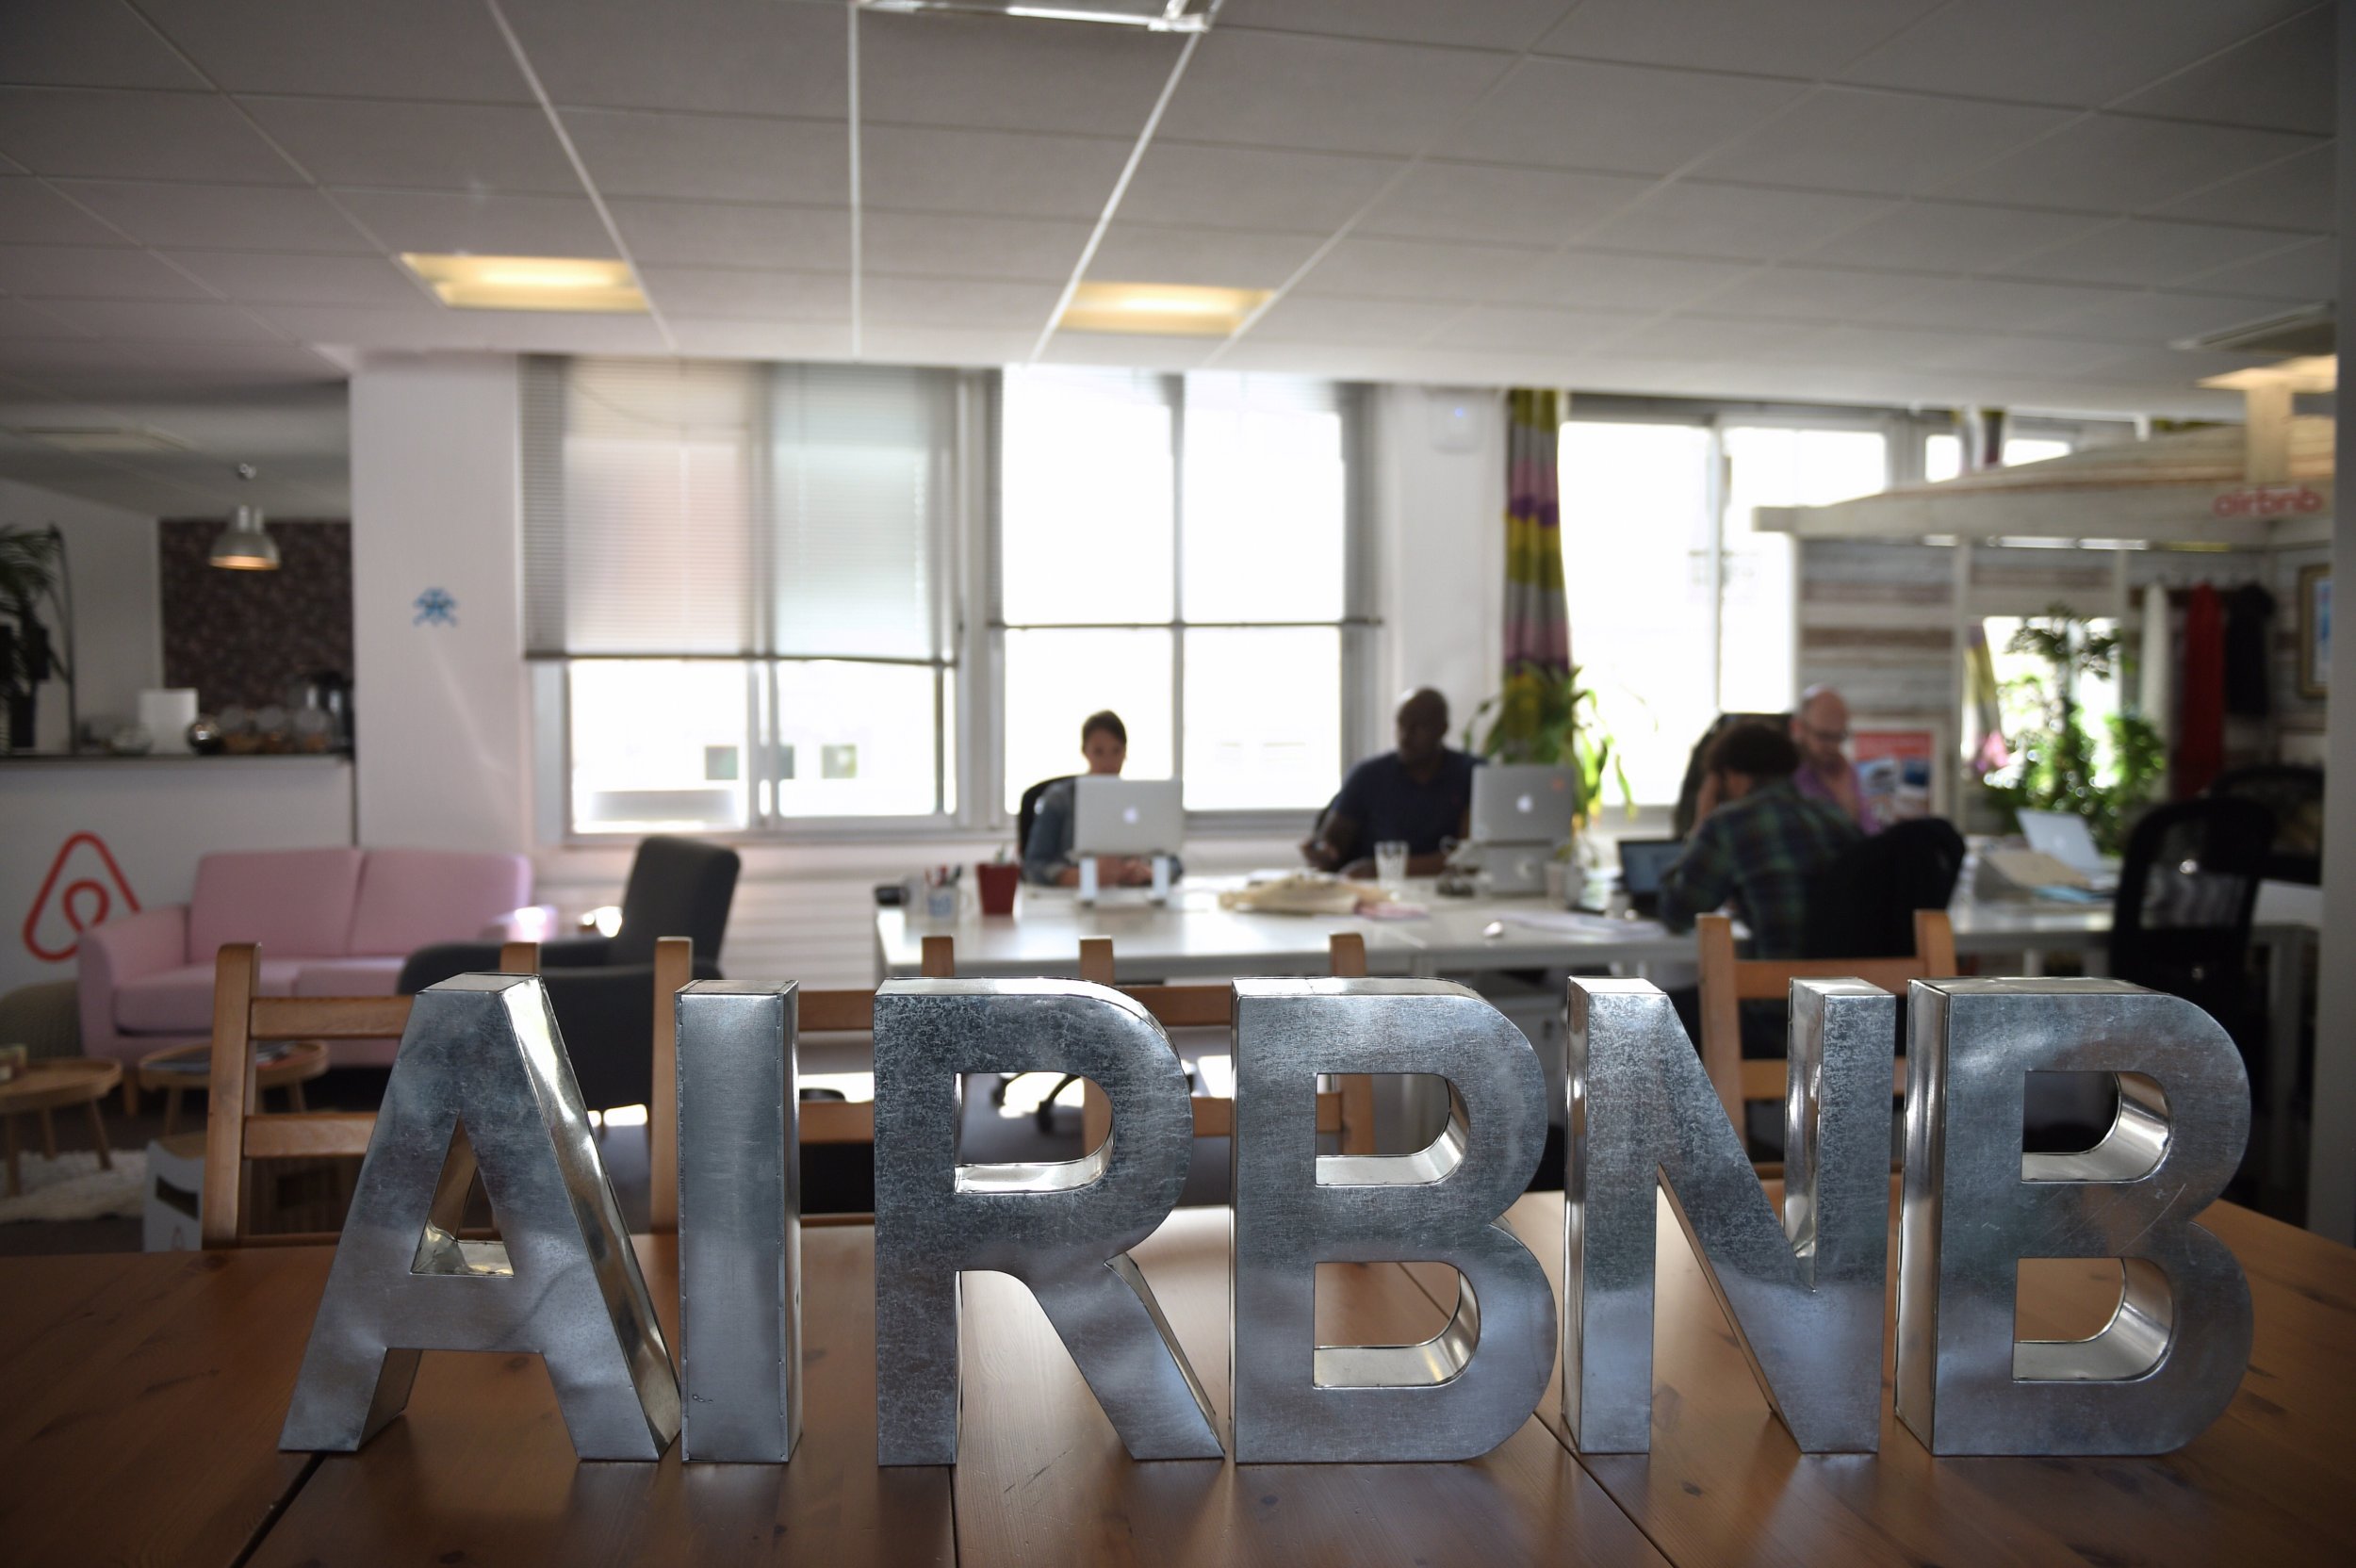 Airbnb Forced Arbitration And An Evolving Privacy Policy That Shares